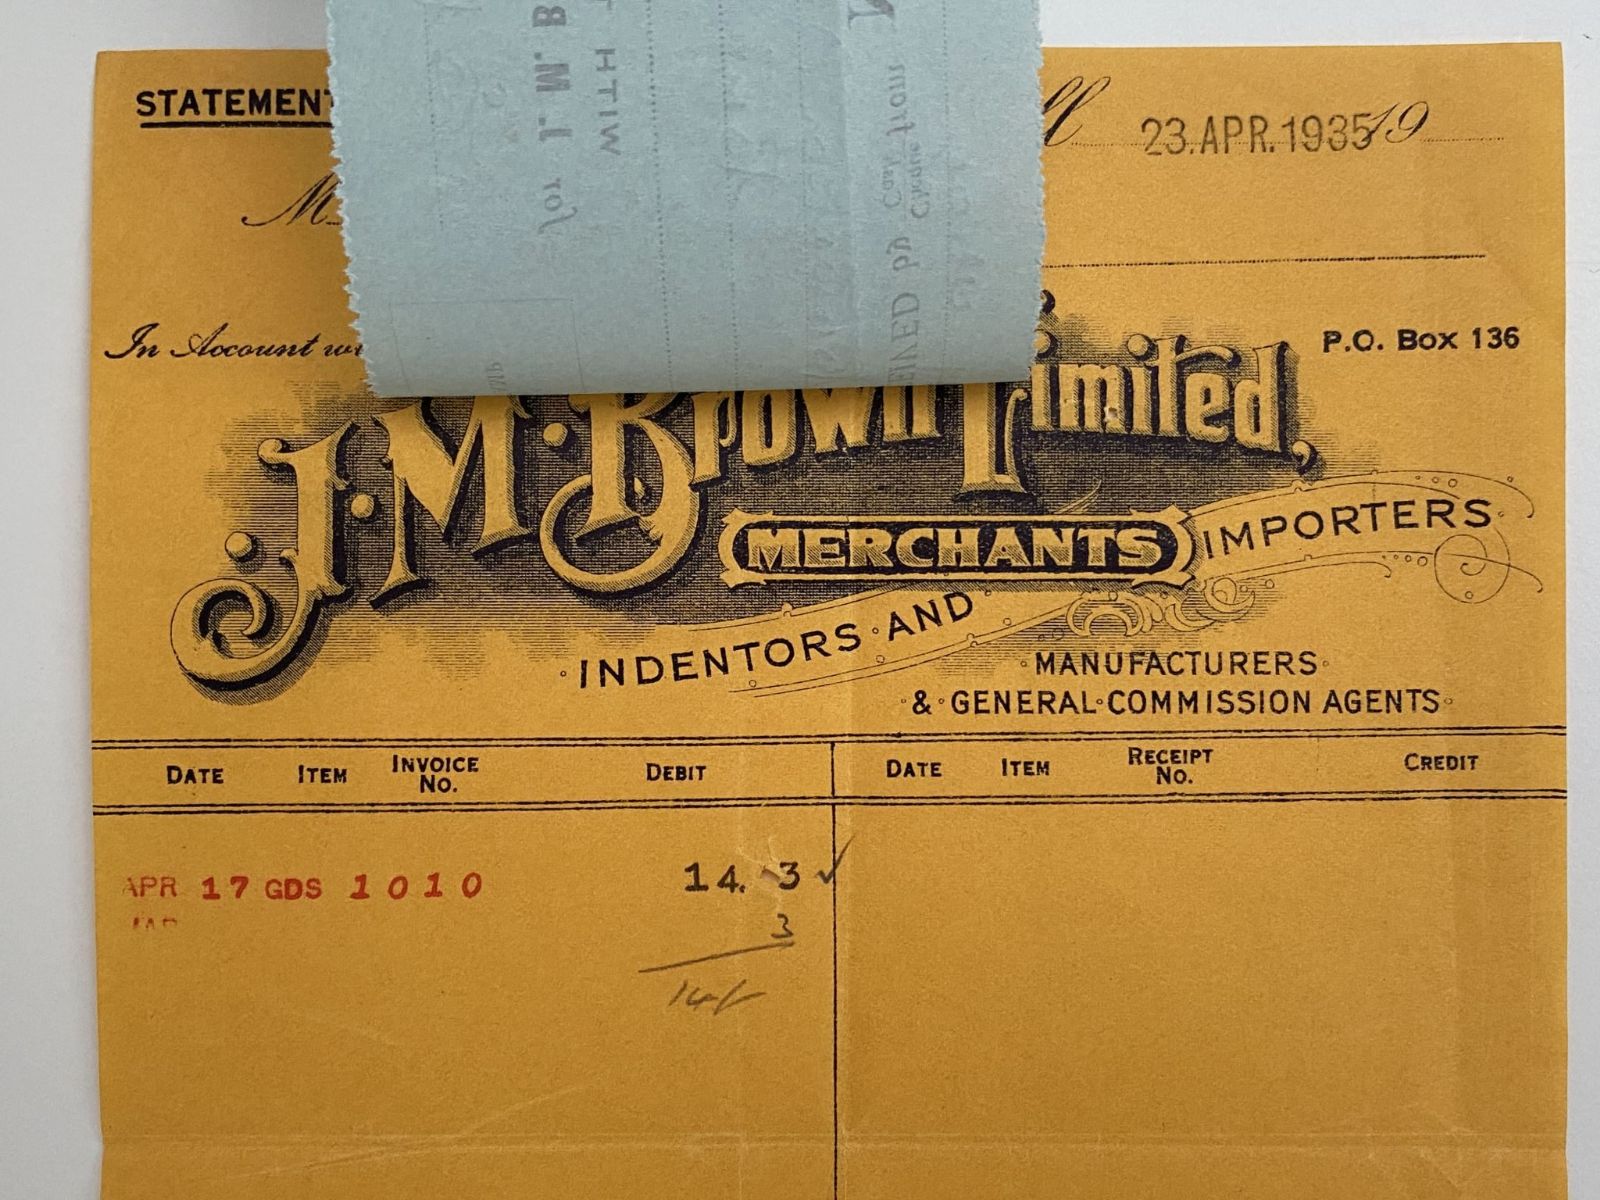 OLD INVOICE / RECEIPT: from J. M. Brown Ltd - Merchants and Importers 1935